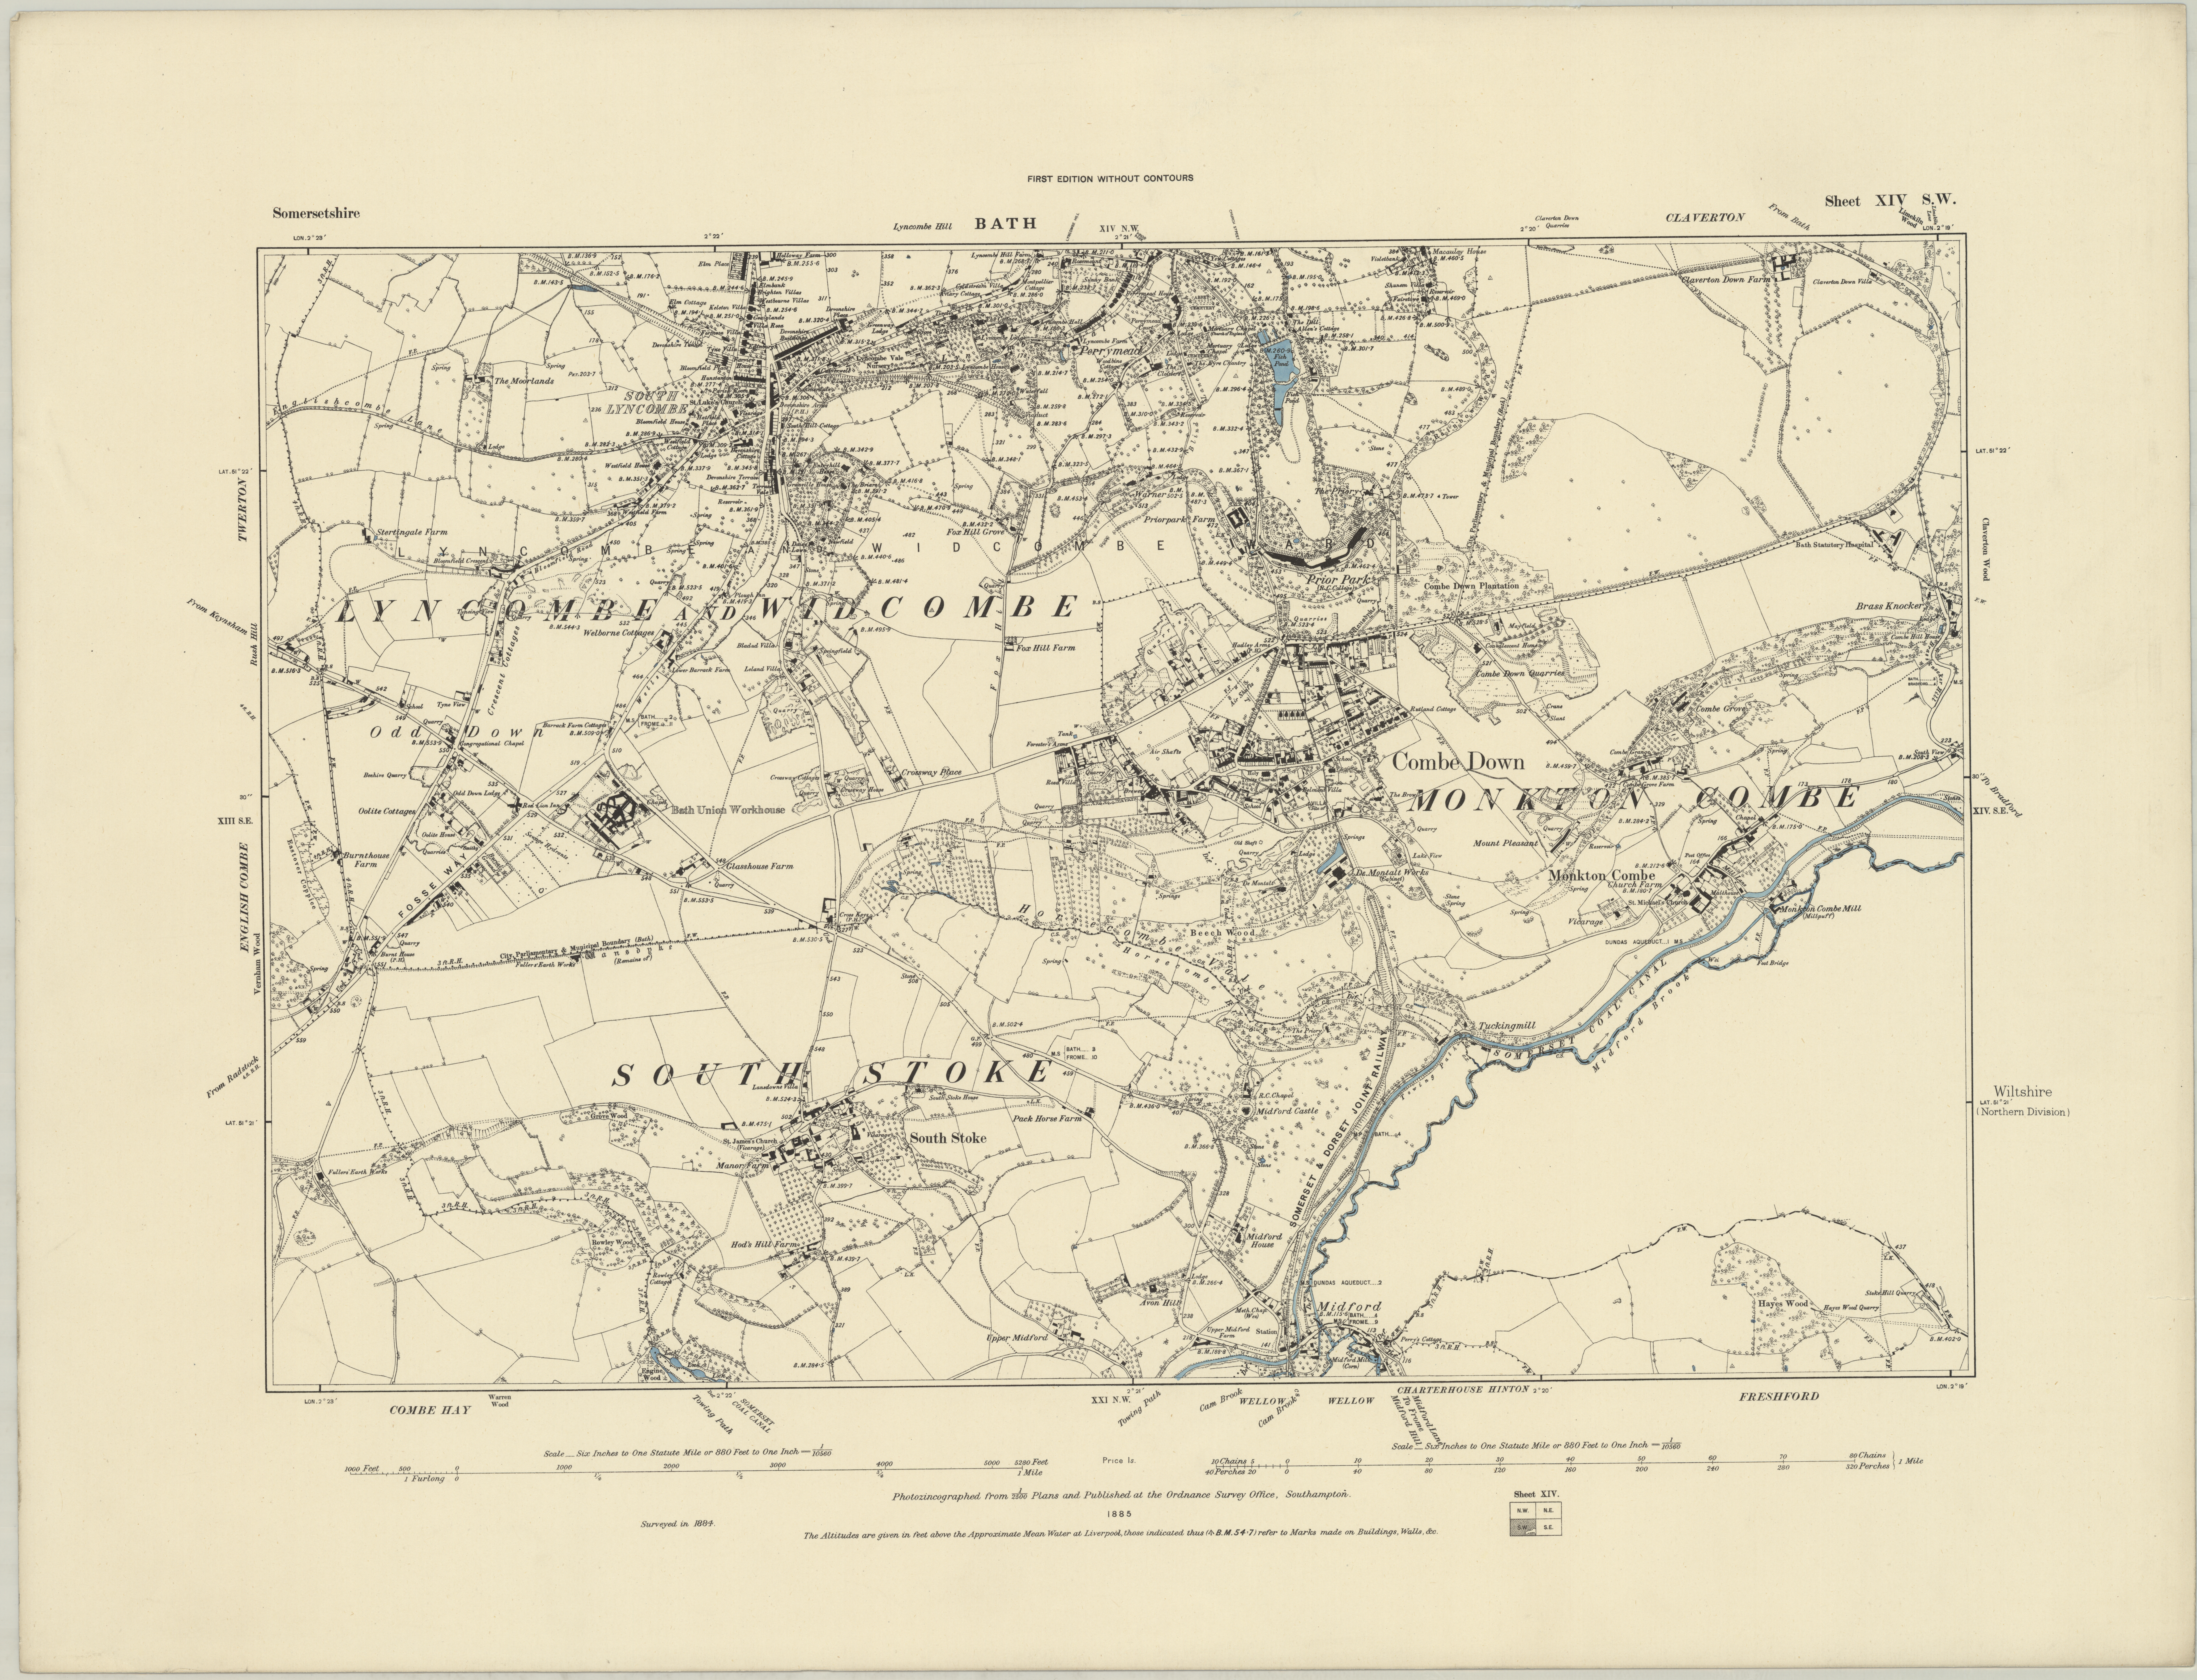 Combe Down and Monkton Combe map for 1885